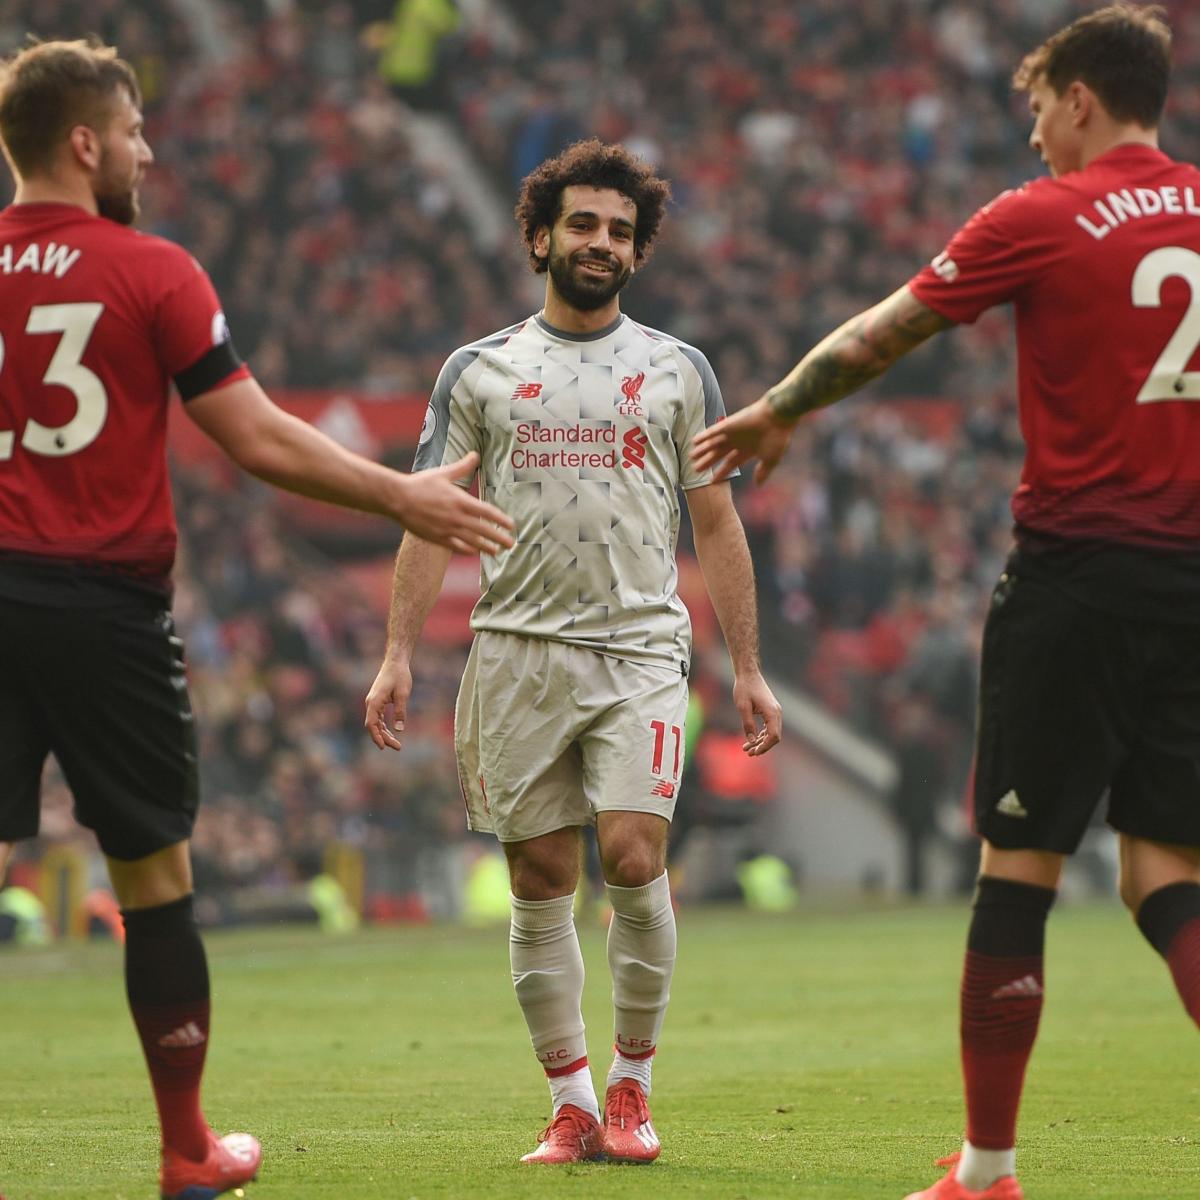 Epl News - EPL Table: 2019 Standings After Tuesday's Week 24 Results